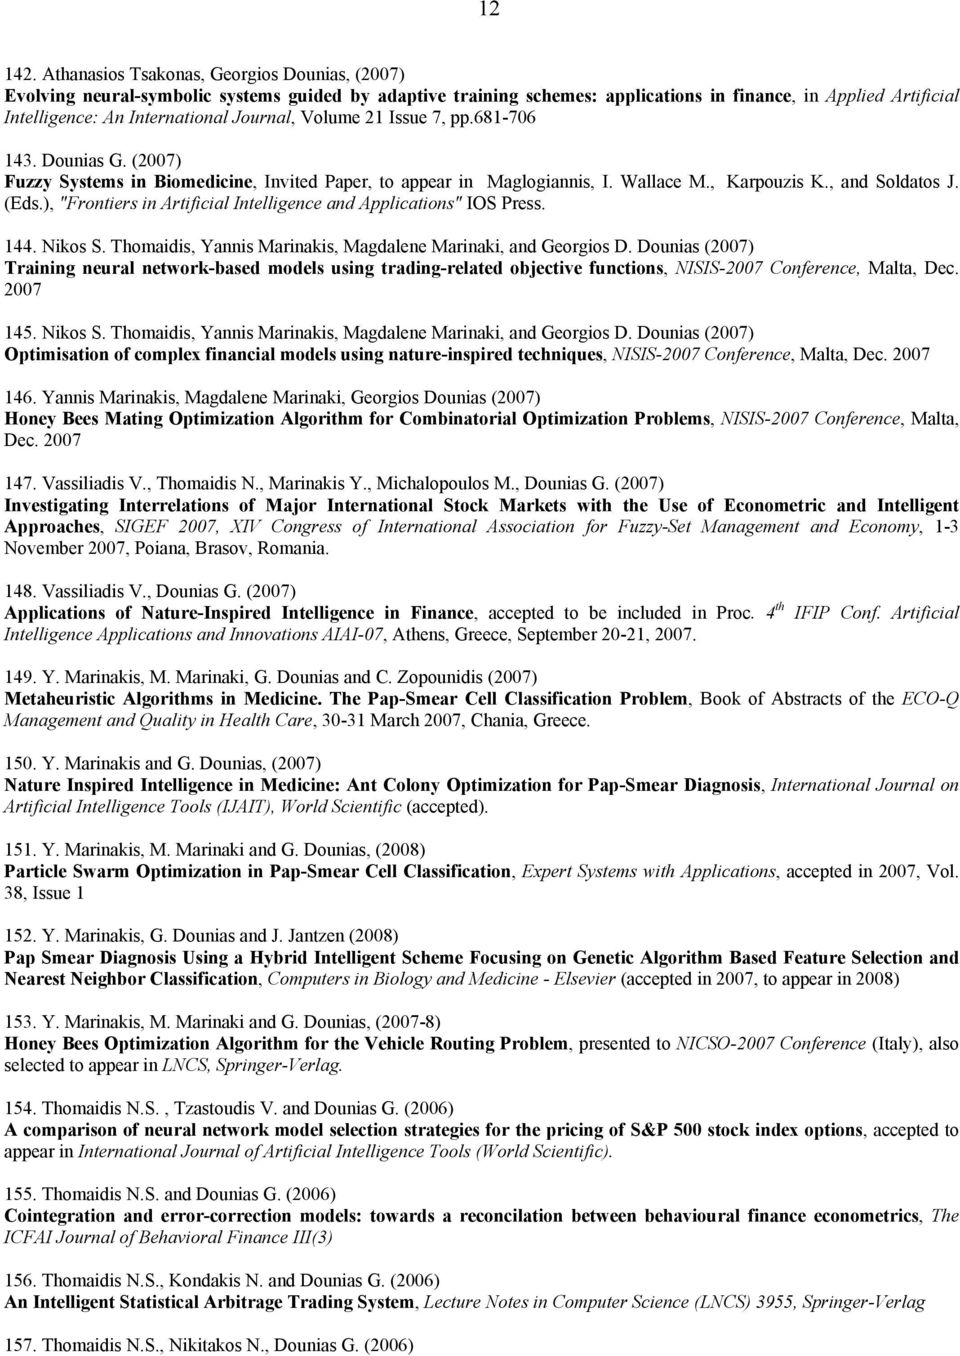 Journal, Volume 21 Issue 7, pp.681-706 143. Dounias G. (2007) Fuzzy Systems in Biomedicine, Invited Paper, to appear in Maglogiannis, I. Wallace M., Karpouzis K., and Soldatos J. (Eds.